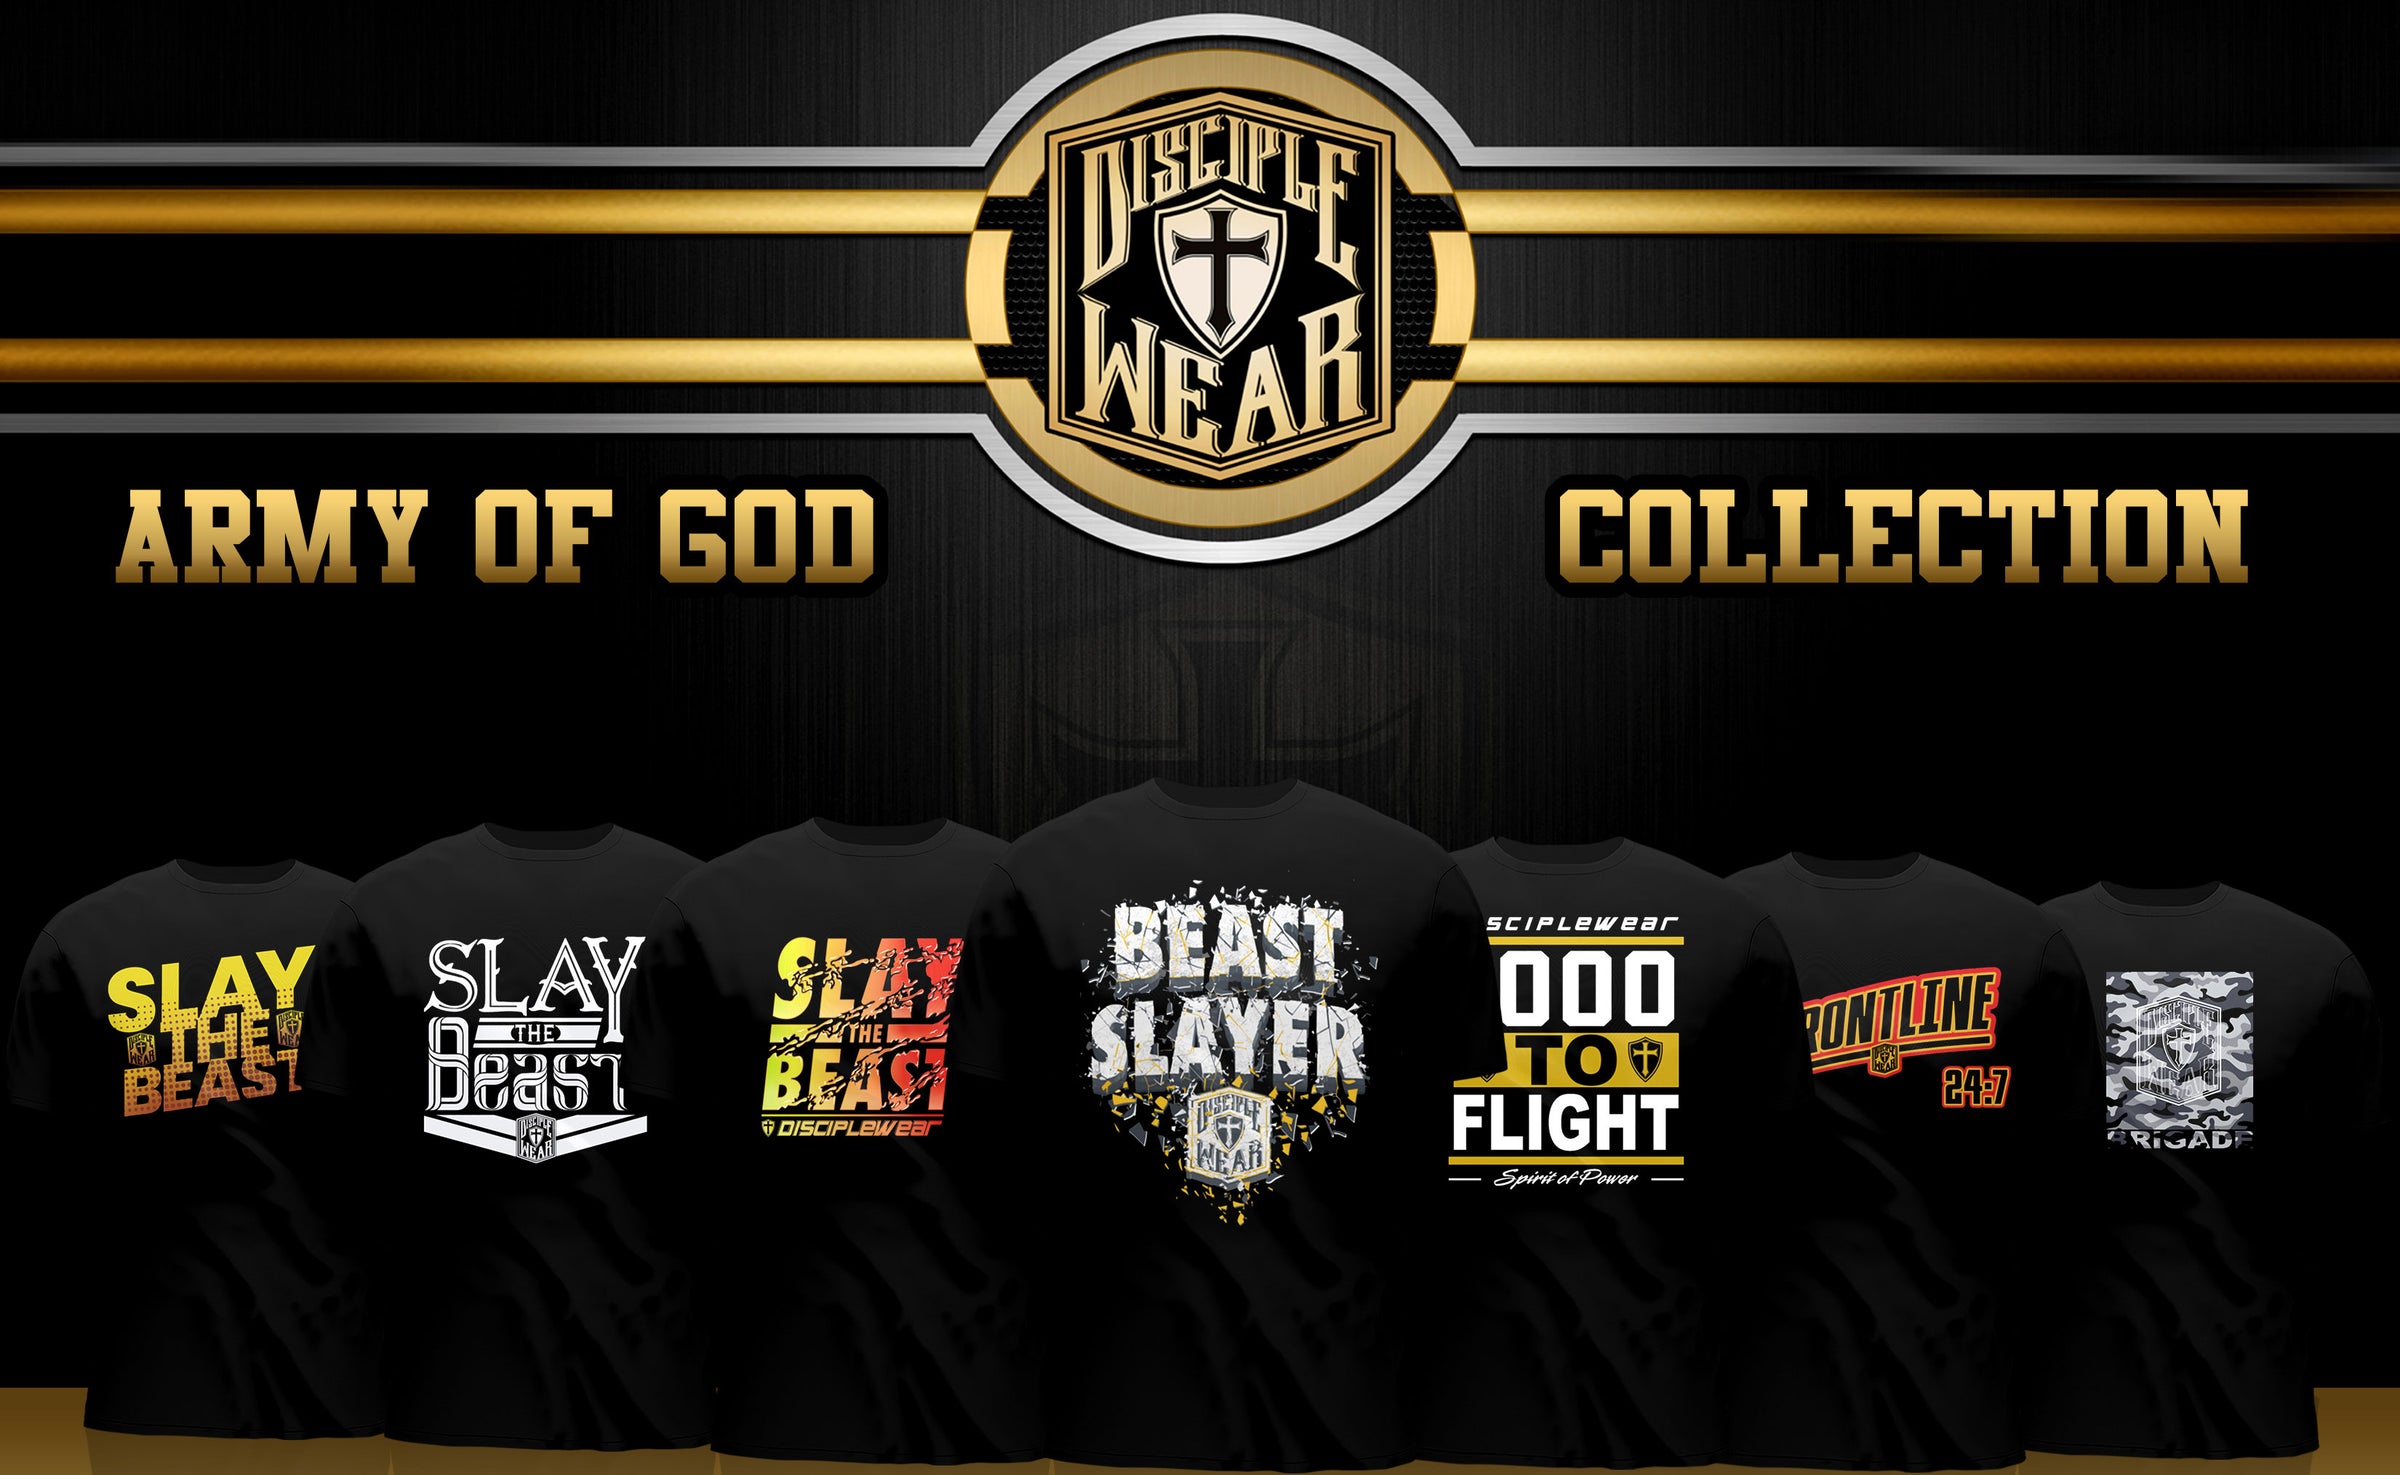 ARMY OF GOD COLLECTION